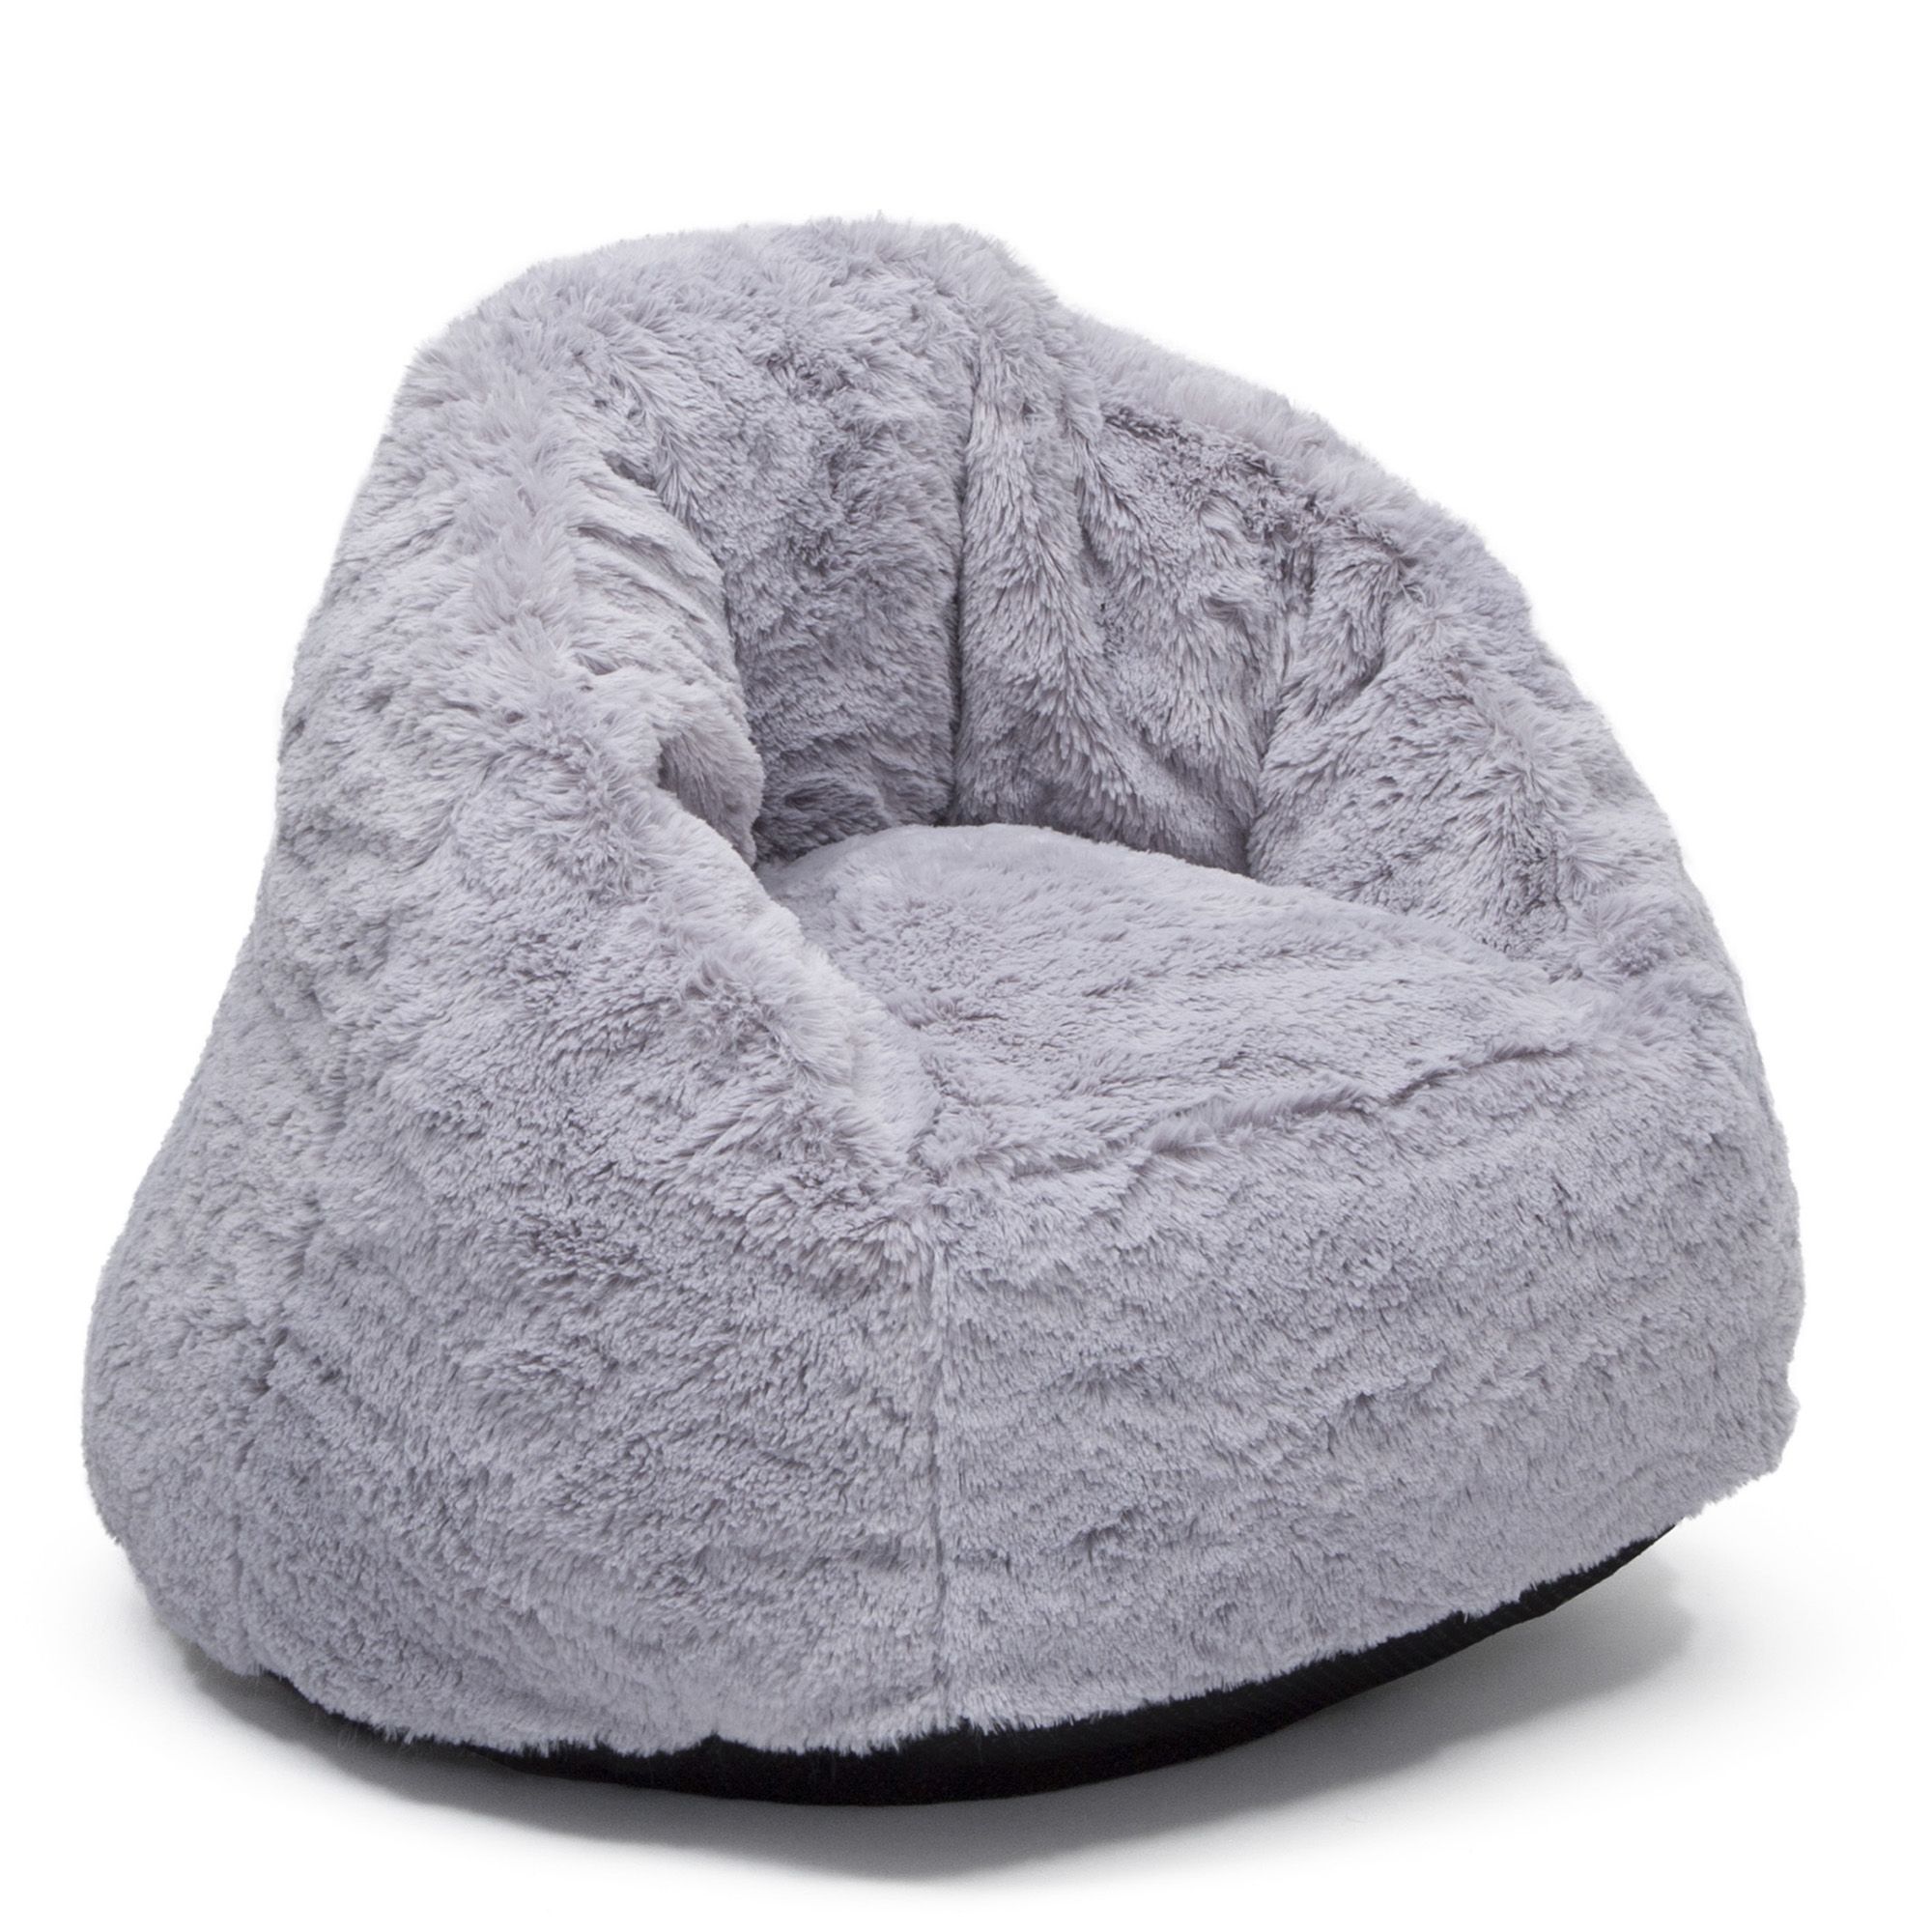 10 Best Bean Bag Chairs For Kids In 2021 Small Large Bean Bag Chairs